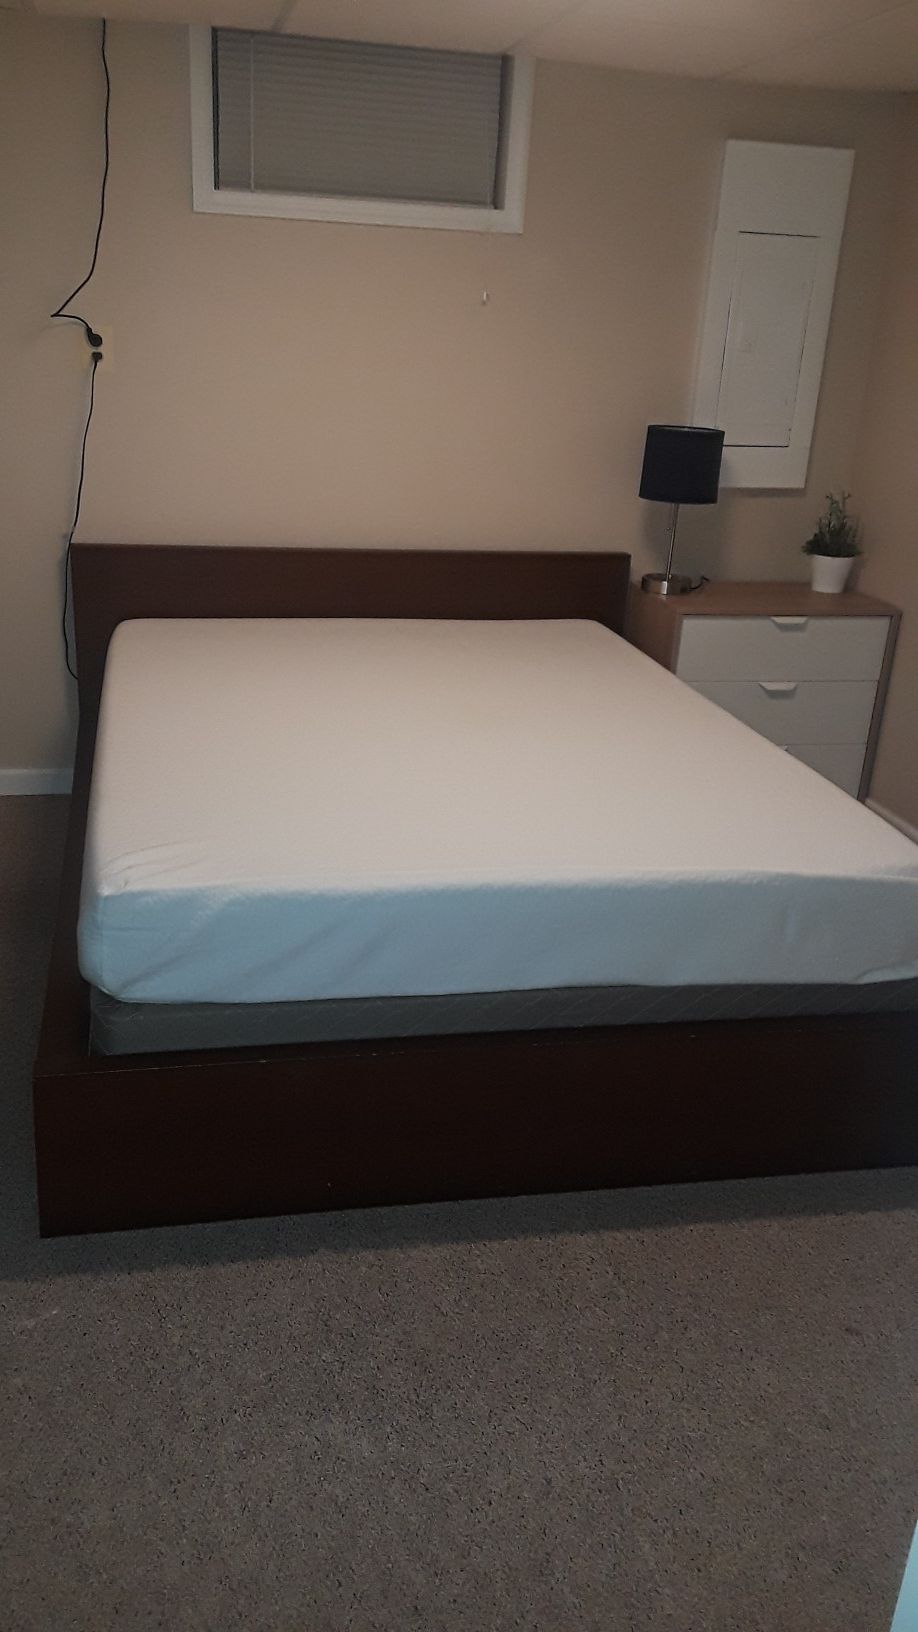 Queen Bed Frame, Memory Foam Mattress and box spring